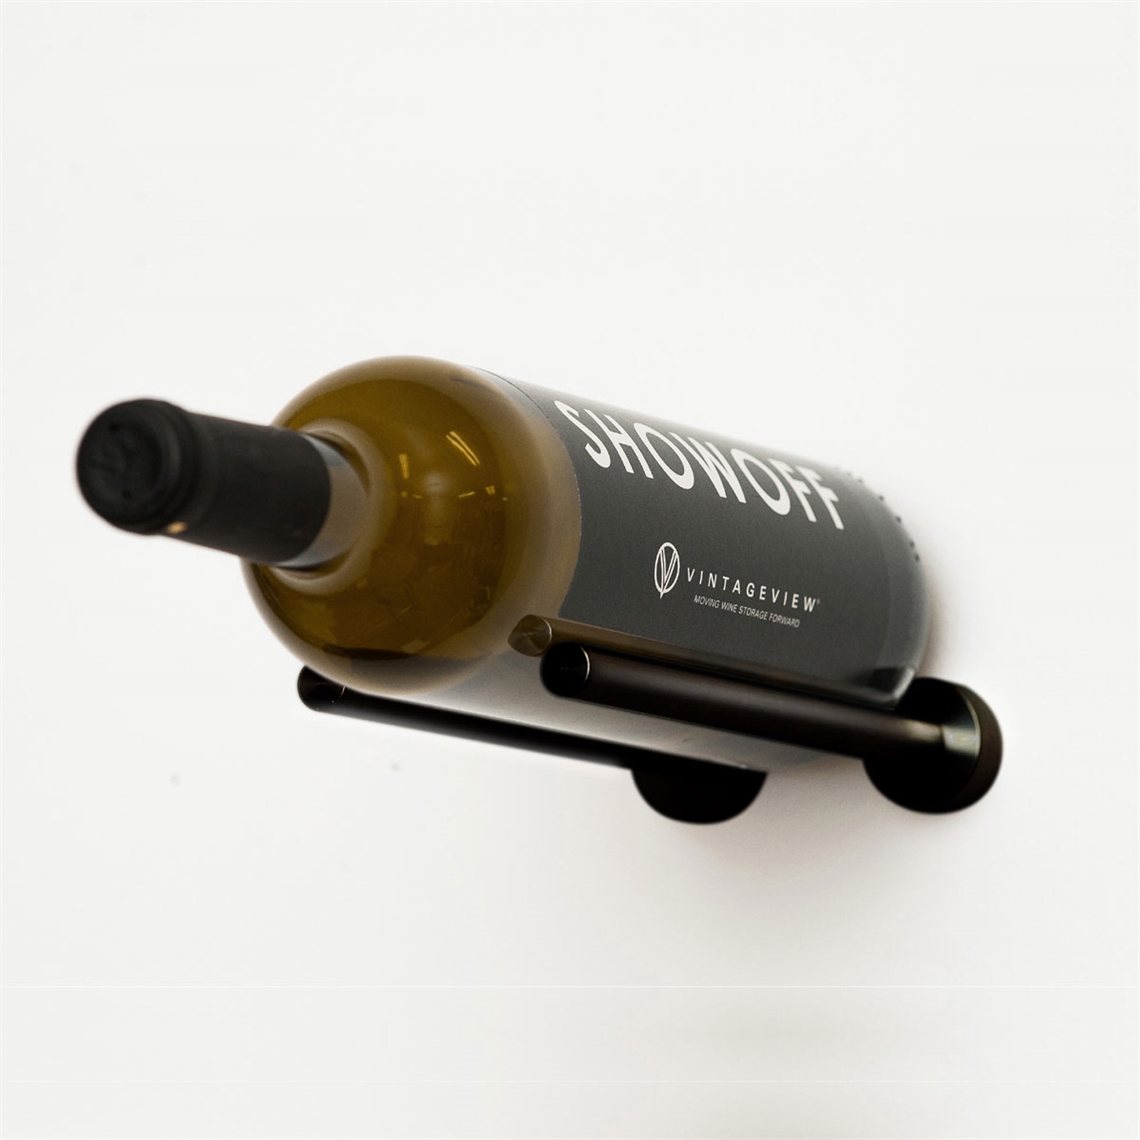 View more nook from our Wall Mounted Wine Racks range